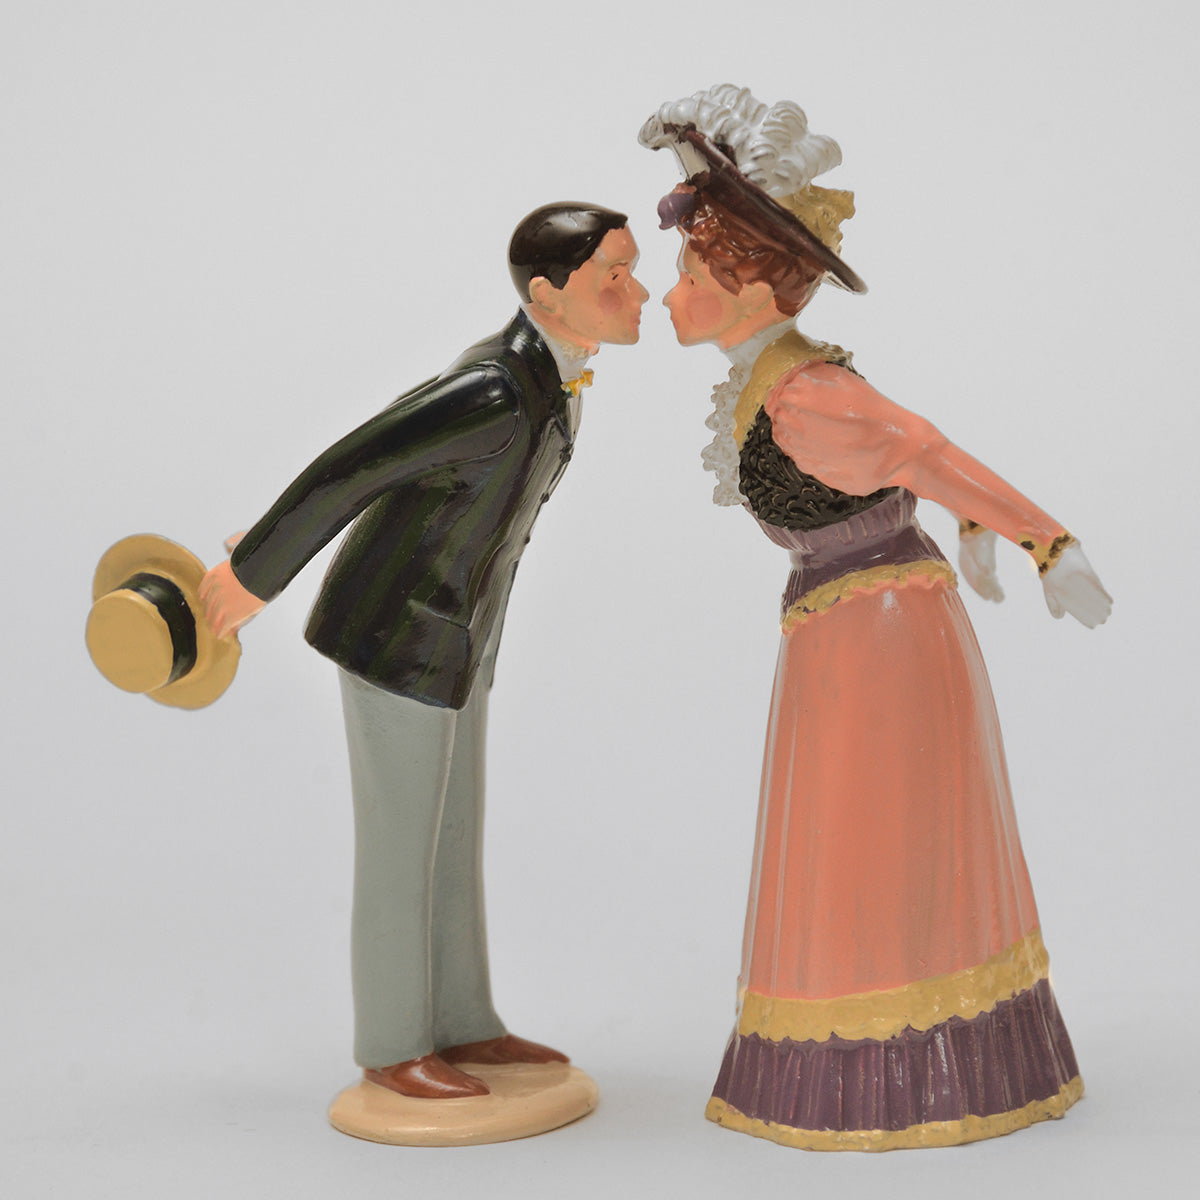 Set 67 Kissing Couple | Victorian Couple | Town and Around | © Imperial Productions | Sculpt by David Cowe